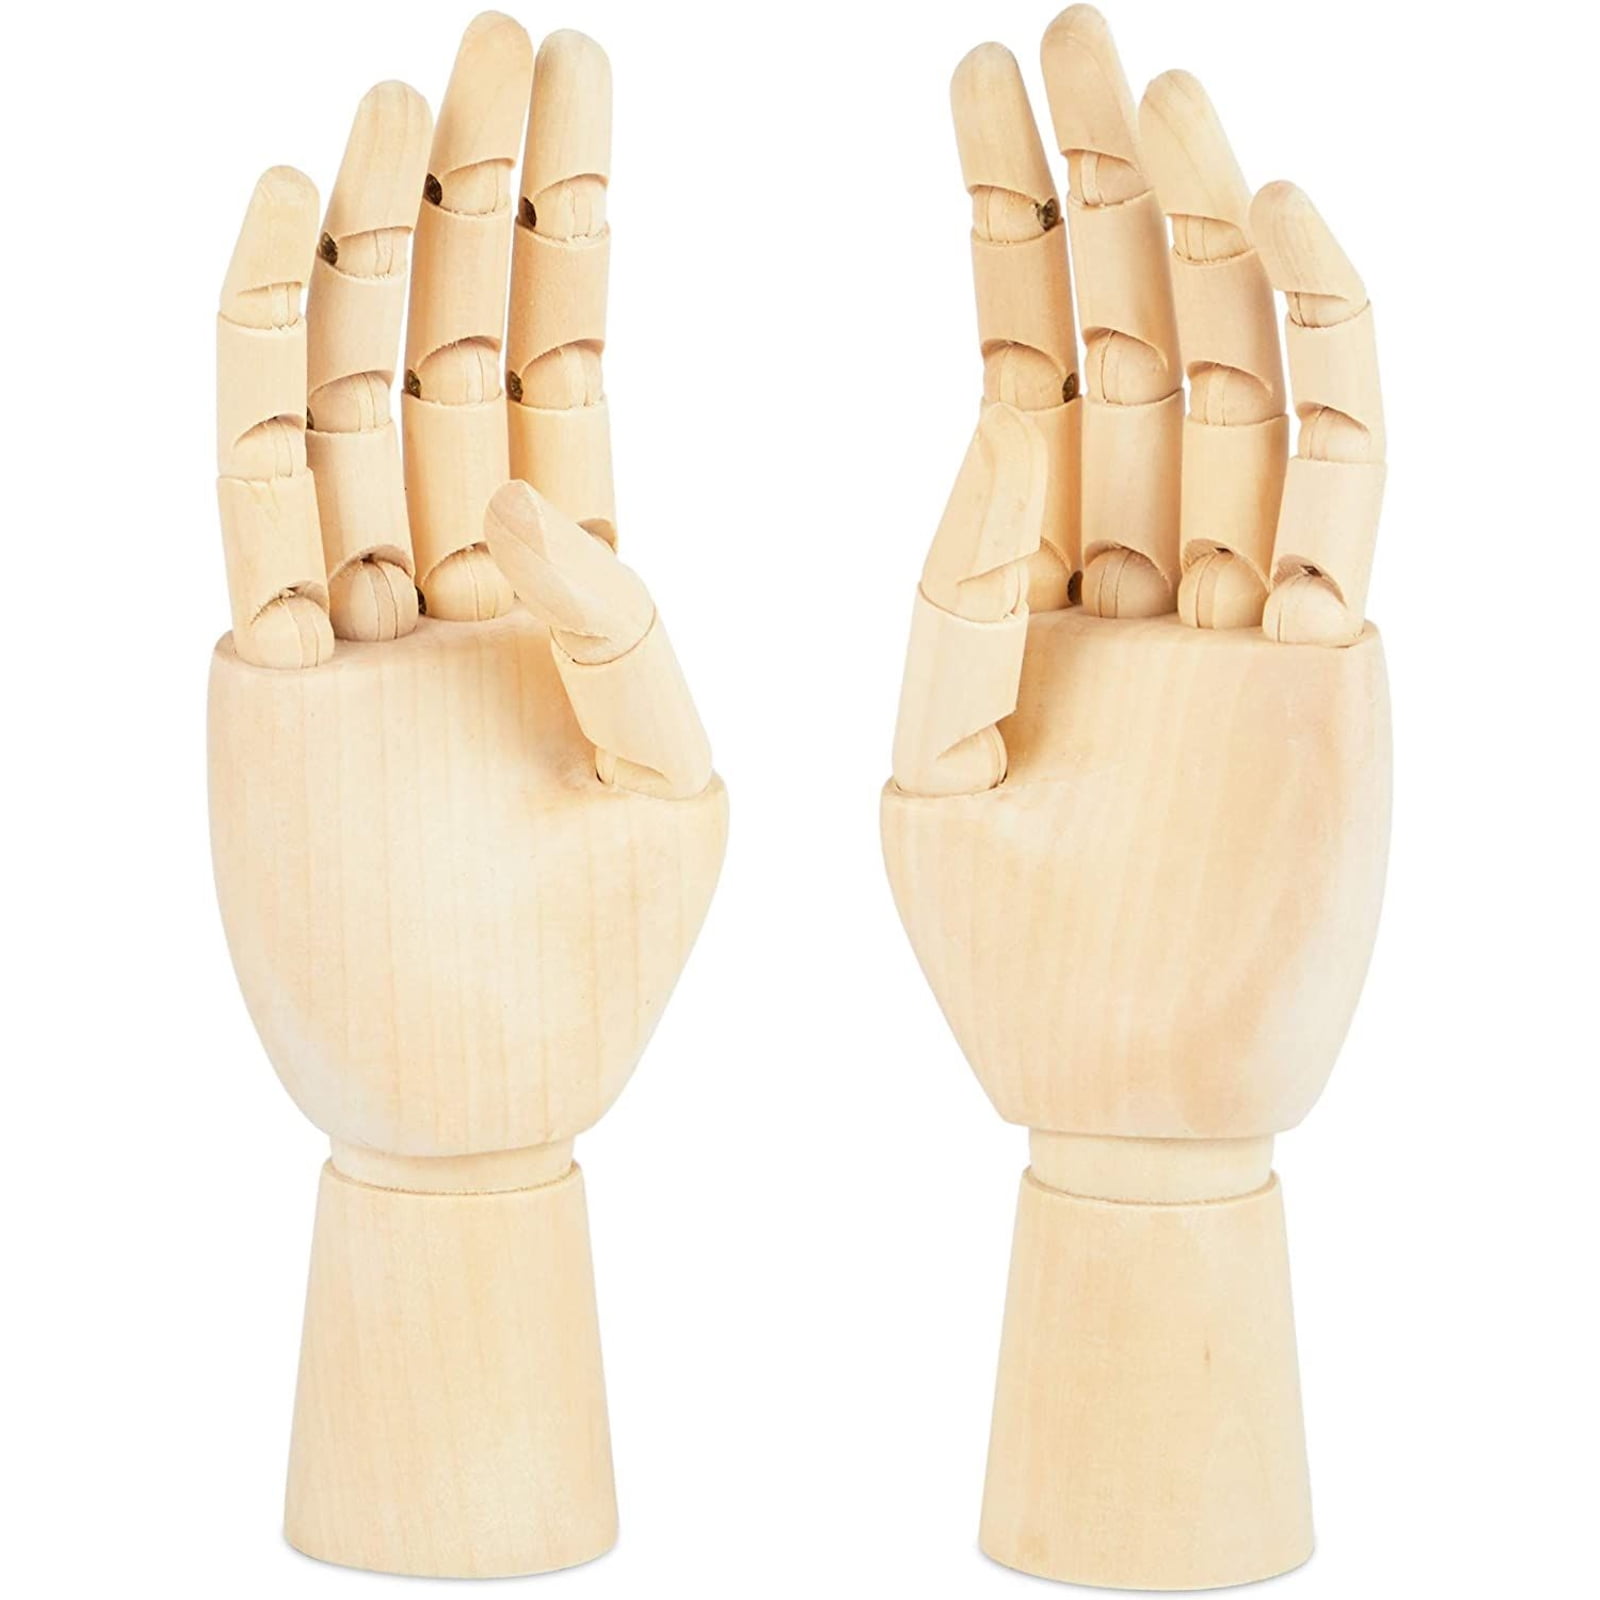 7 Left+Right Hand Art Wooden Hand Artist Jointed Articulated Mannequin Wood Hand,Sectioned Opposable Figure Sculpture Manikin Hand Model with Flexible Fingers,for Drawing,Sketching